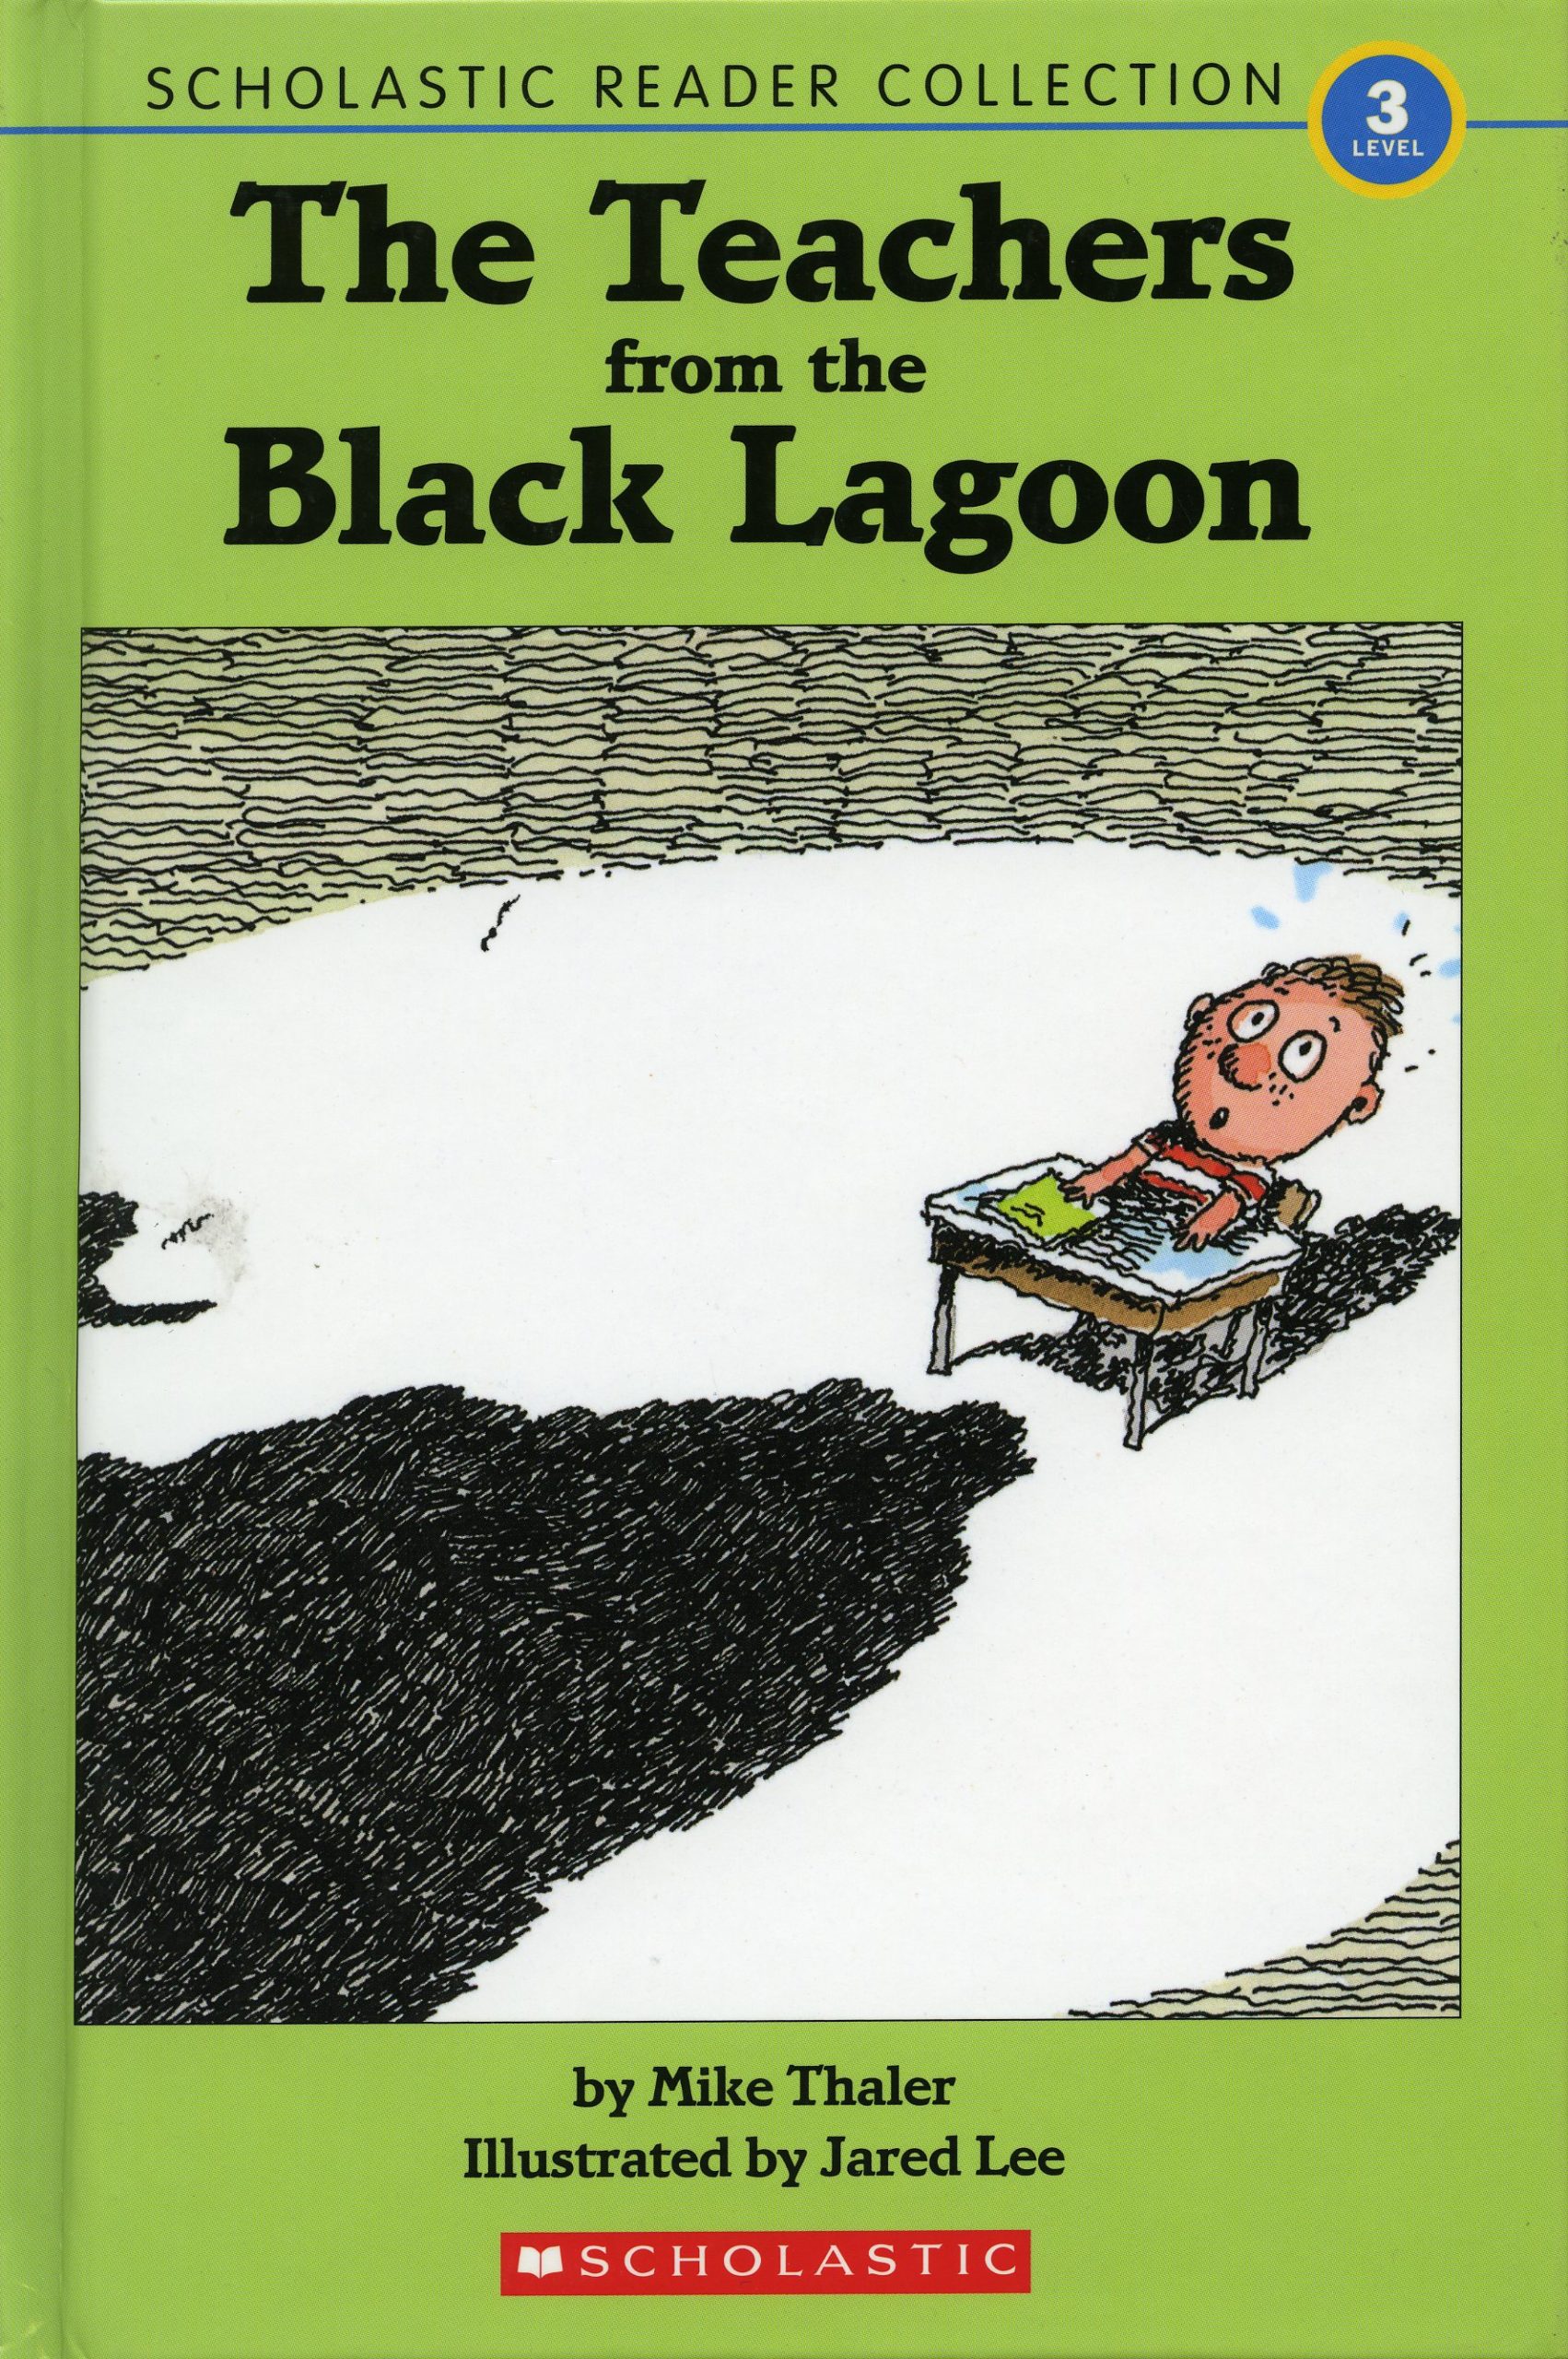 The Teachers from the Black Lagoon by Mike Thaler